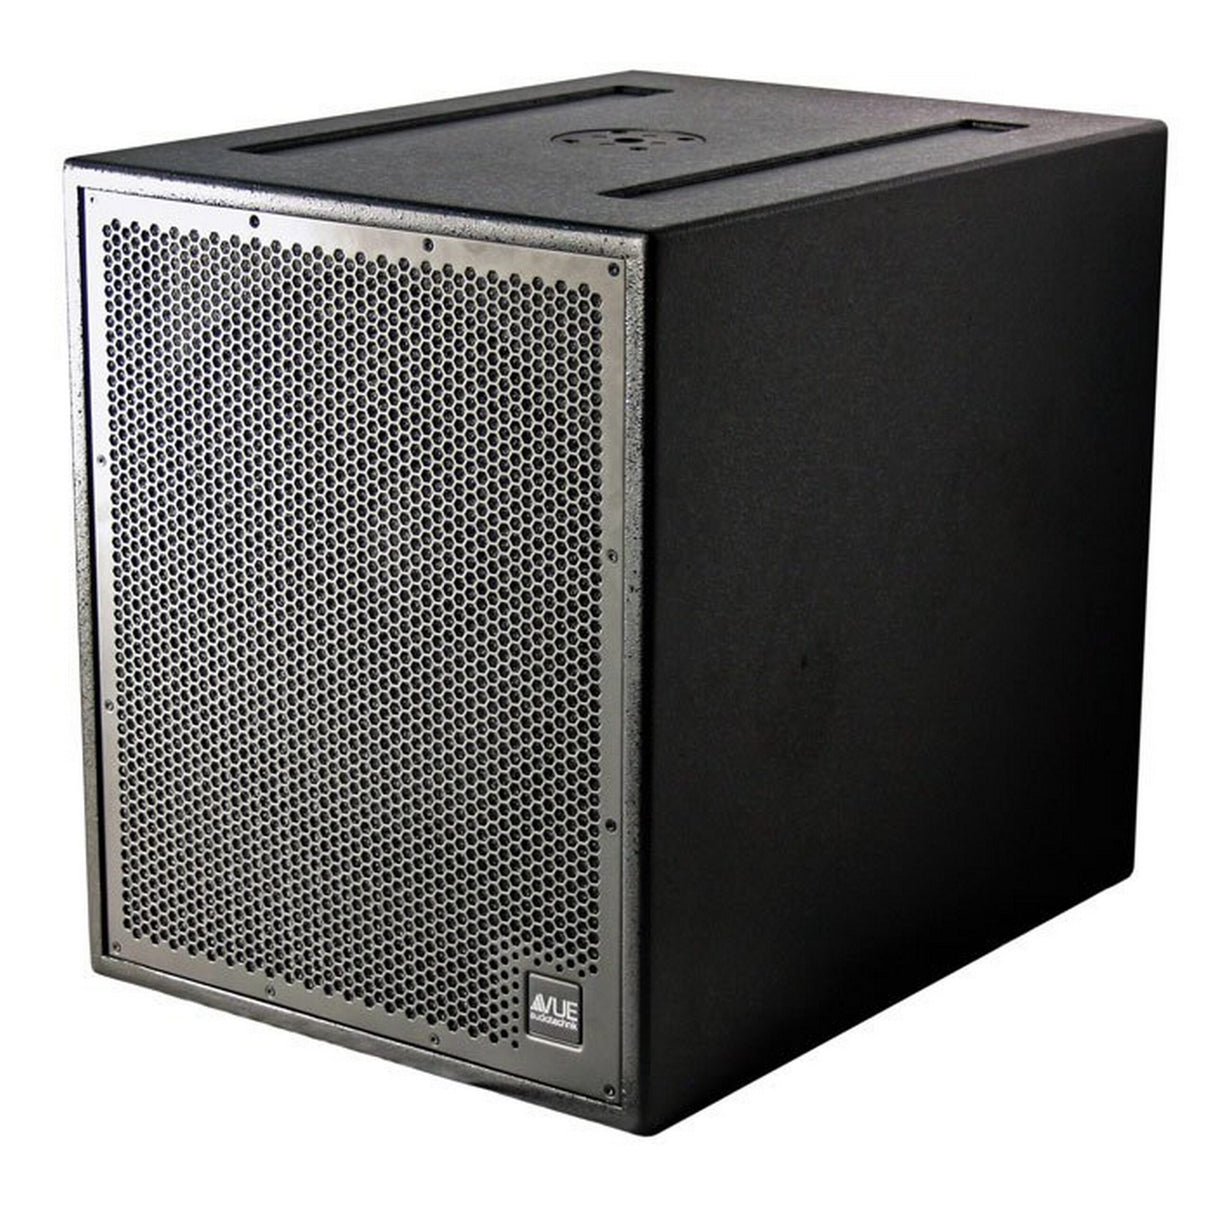 VUE Audiotechnik is-15 High Output Passive Installation Subwoofer, Single 15-Inch